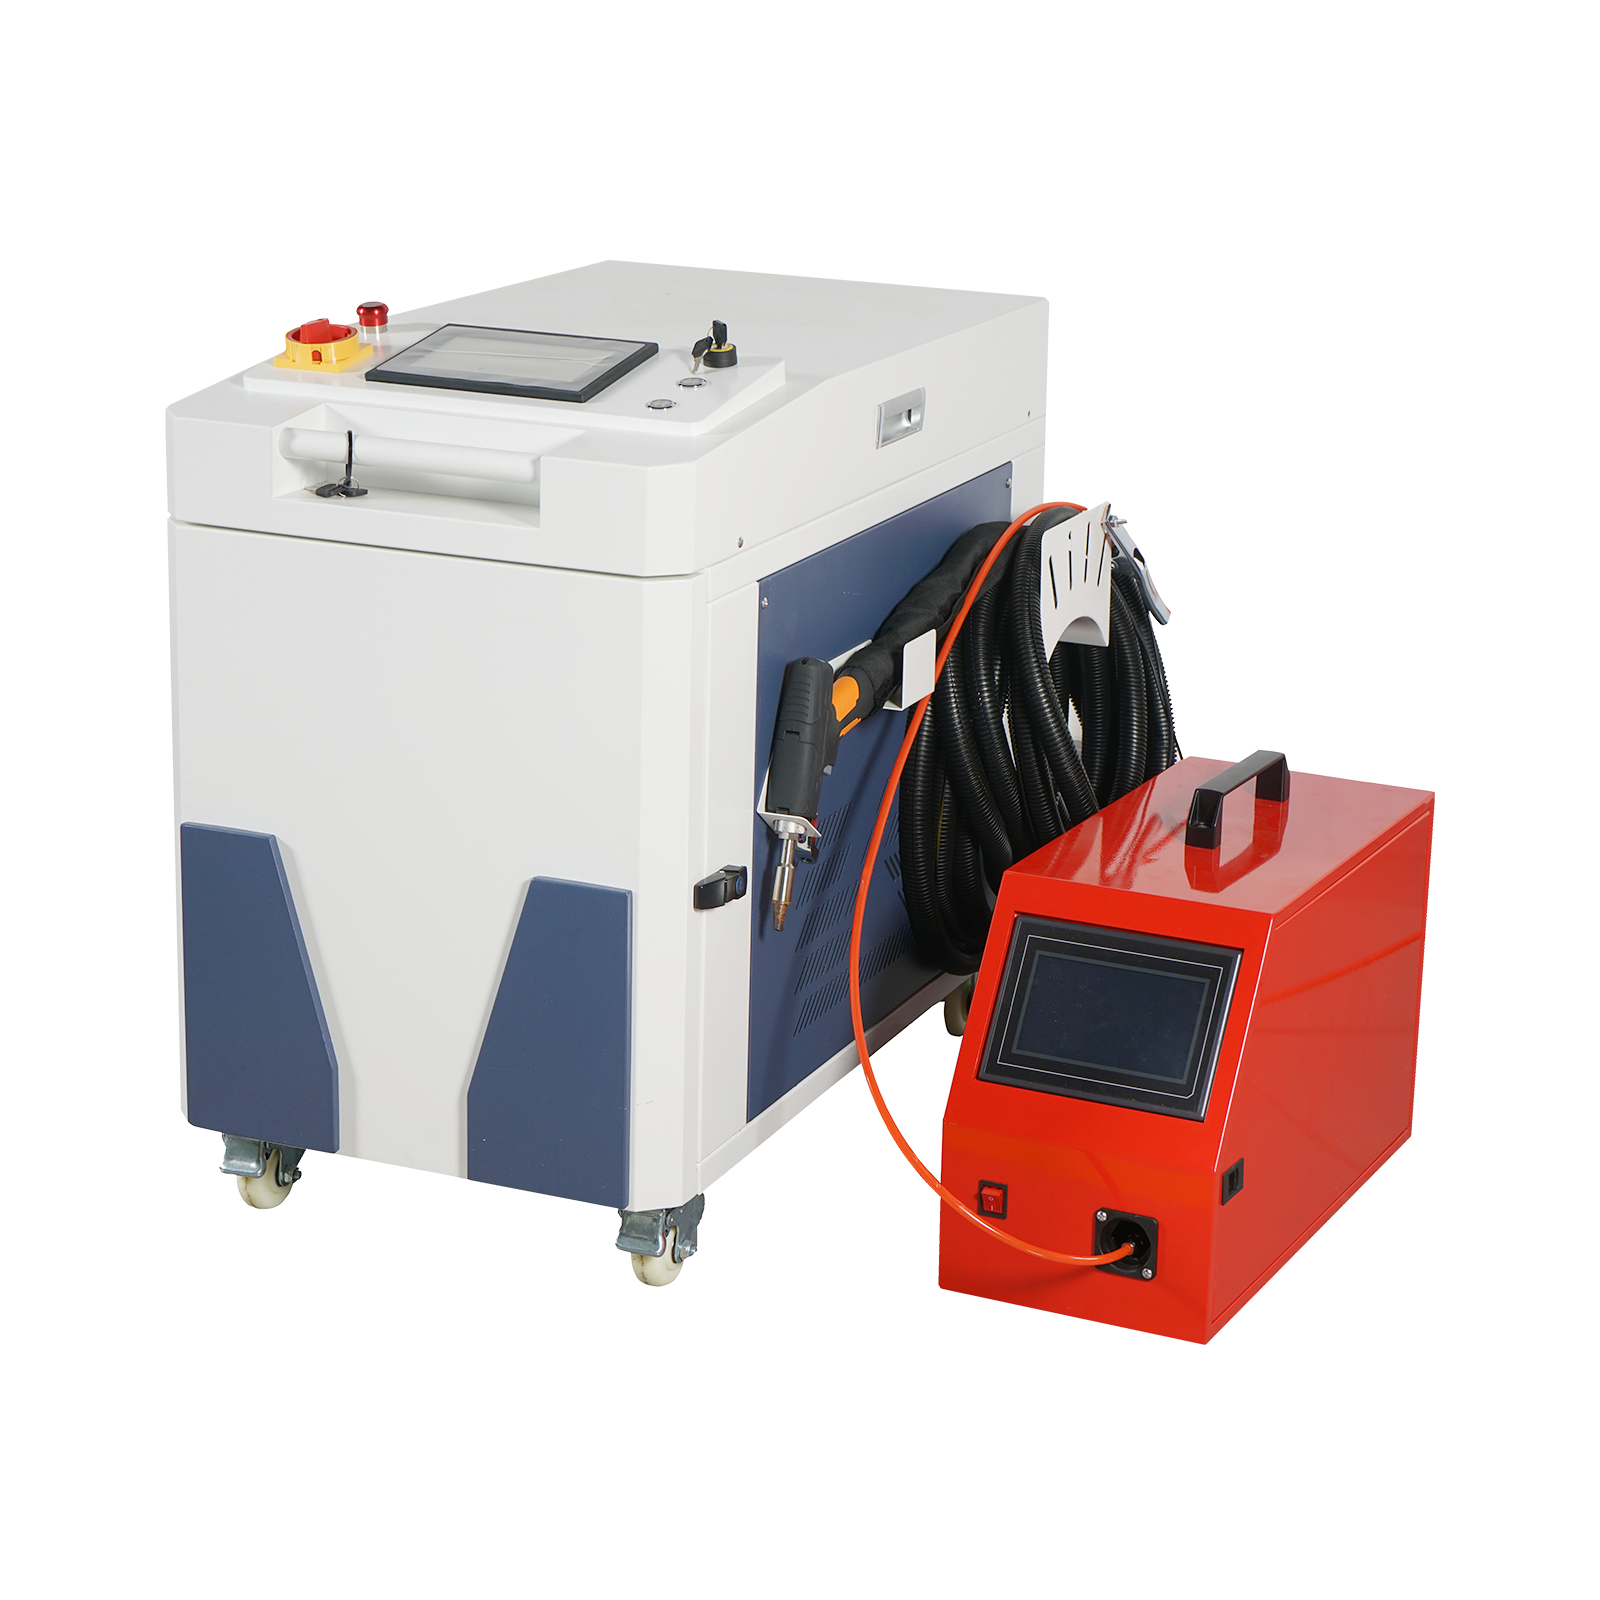 MCWlaser 2 In 1 Head 1000W/1500W/ 2000W Handheld Laser Welding Machine Continuous Fiber Laser Welder with Auto Wire Feeder and Cooling System for Metal Welding 220V 50/60Hz - White